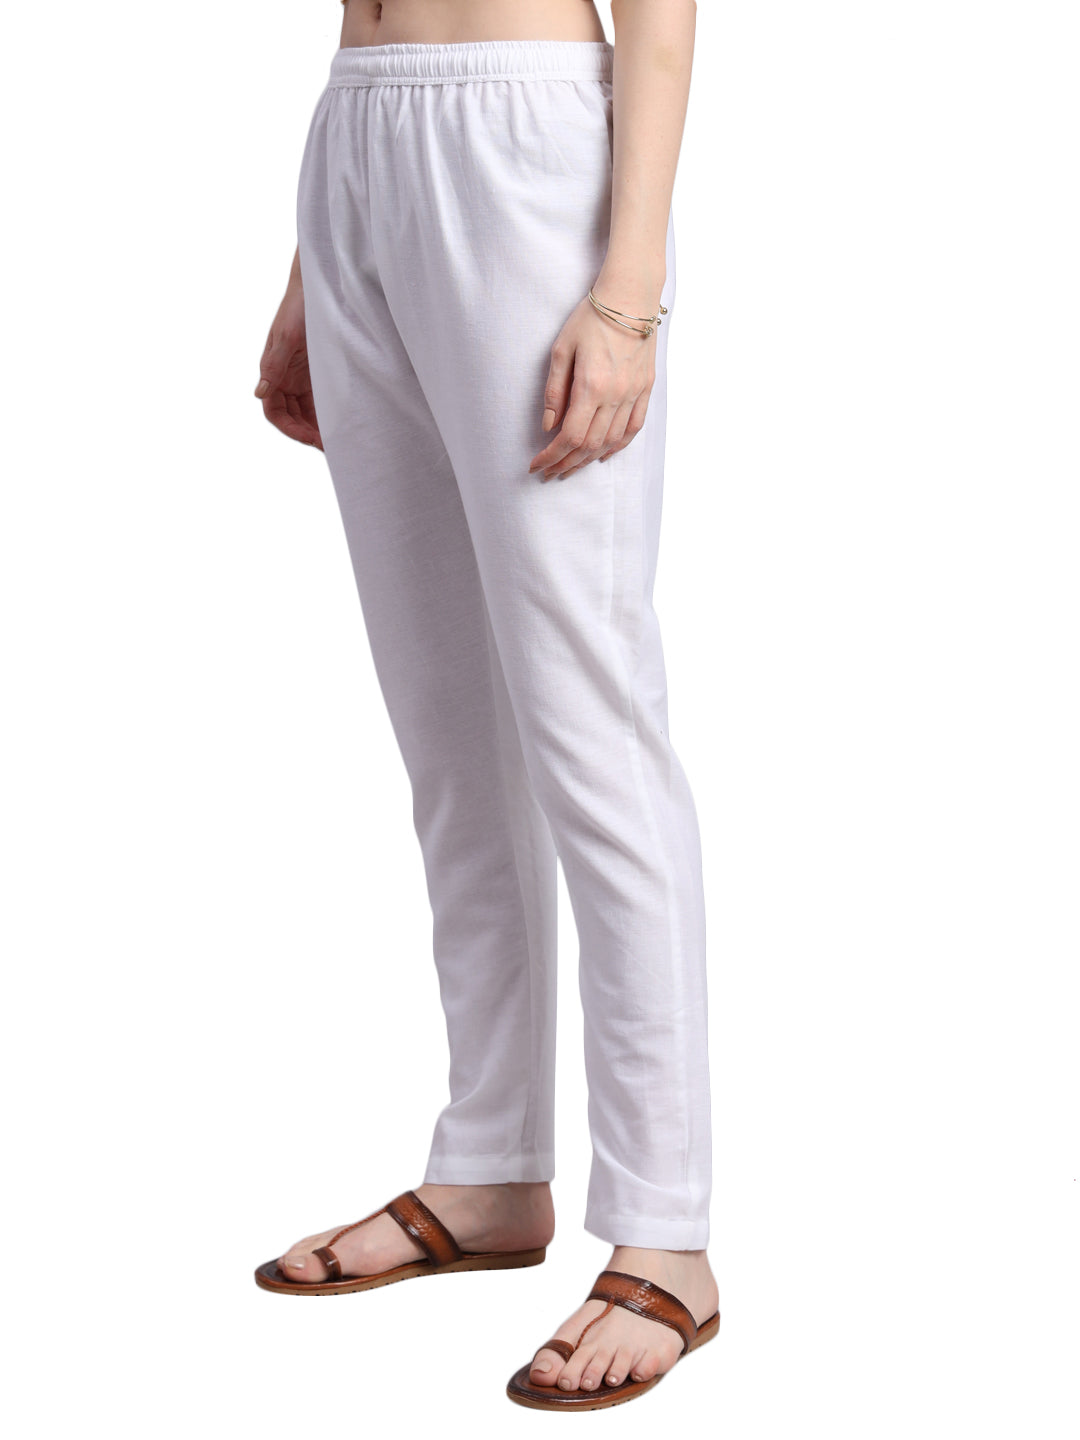 Vastraa Fusion Straight Regular Fit Stylish Solid Cotton Palazzo Pant or Bottoms for Women's